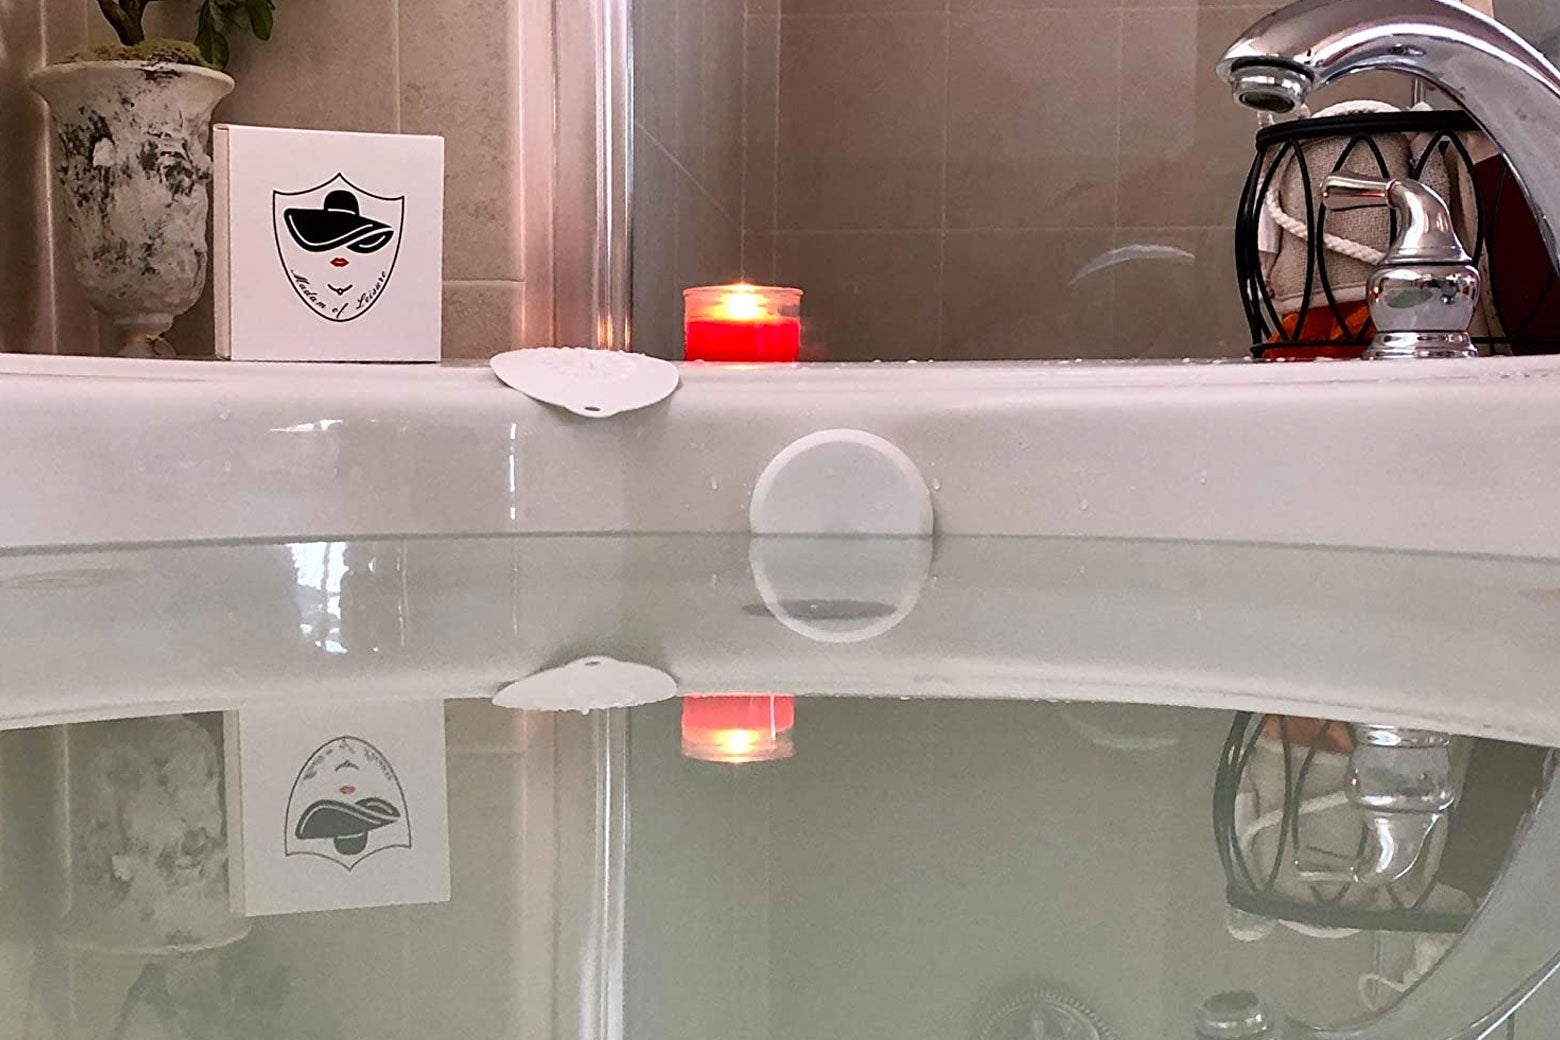 Bathtub full of water with overflow drain covered and a lit candle on the ledge